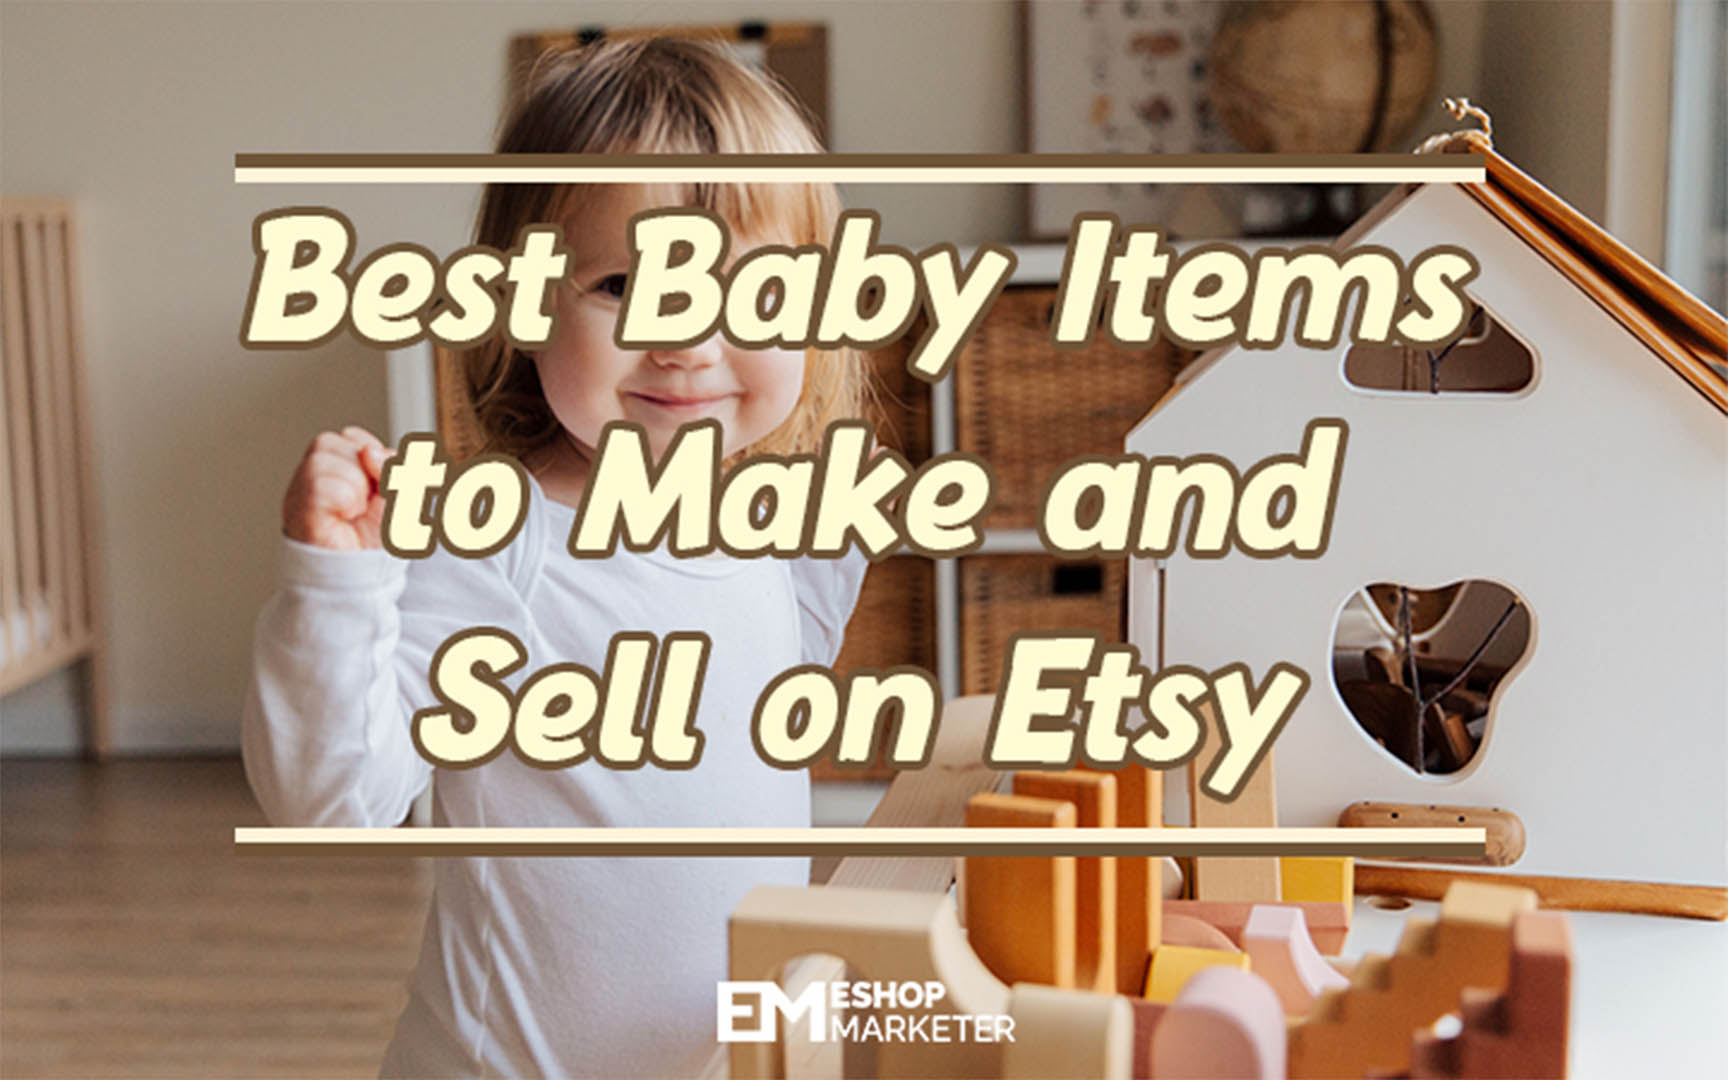 Best Baby Items to Make and Sell on Etsy - eShop Marketer